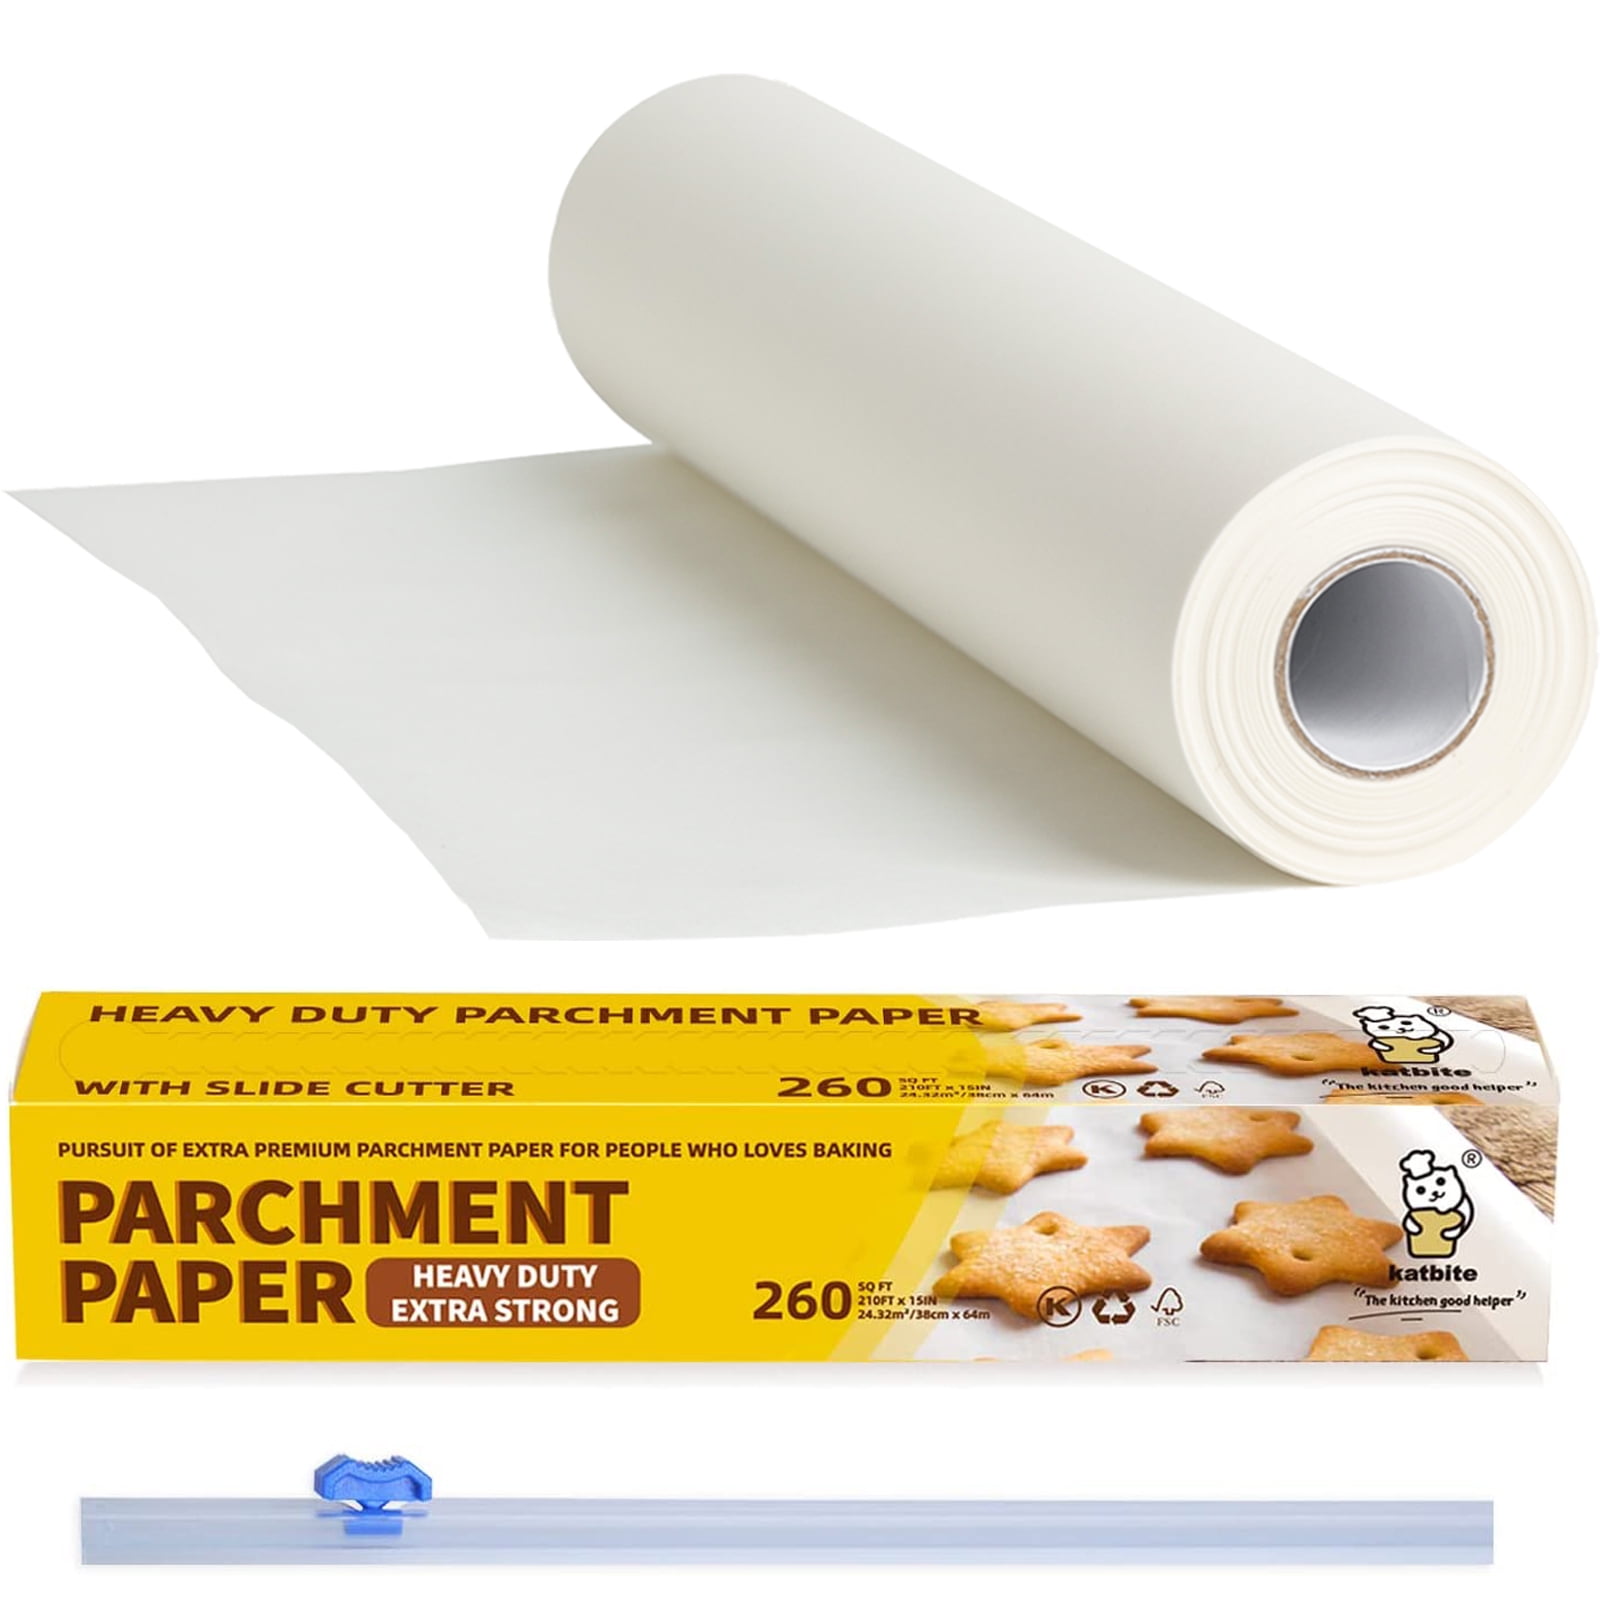 Katbite Heavy Duty Parchment Paper Roll for Baking, 15 in x 210 ft, 260  Sq.Ft,White. 